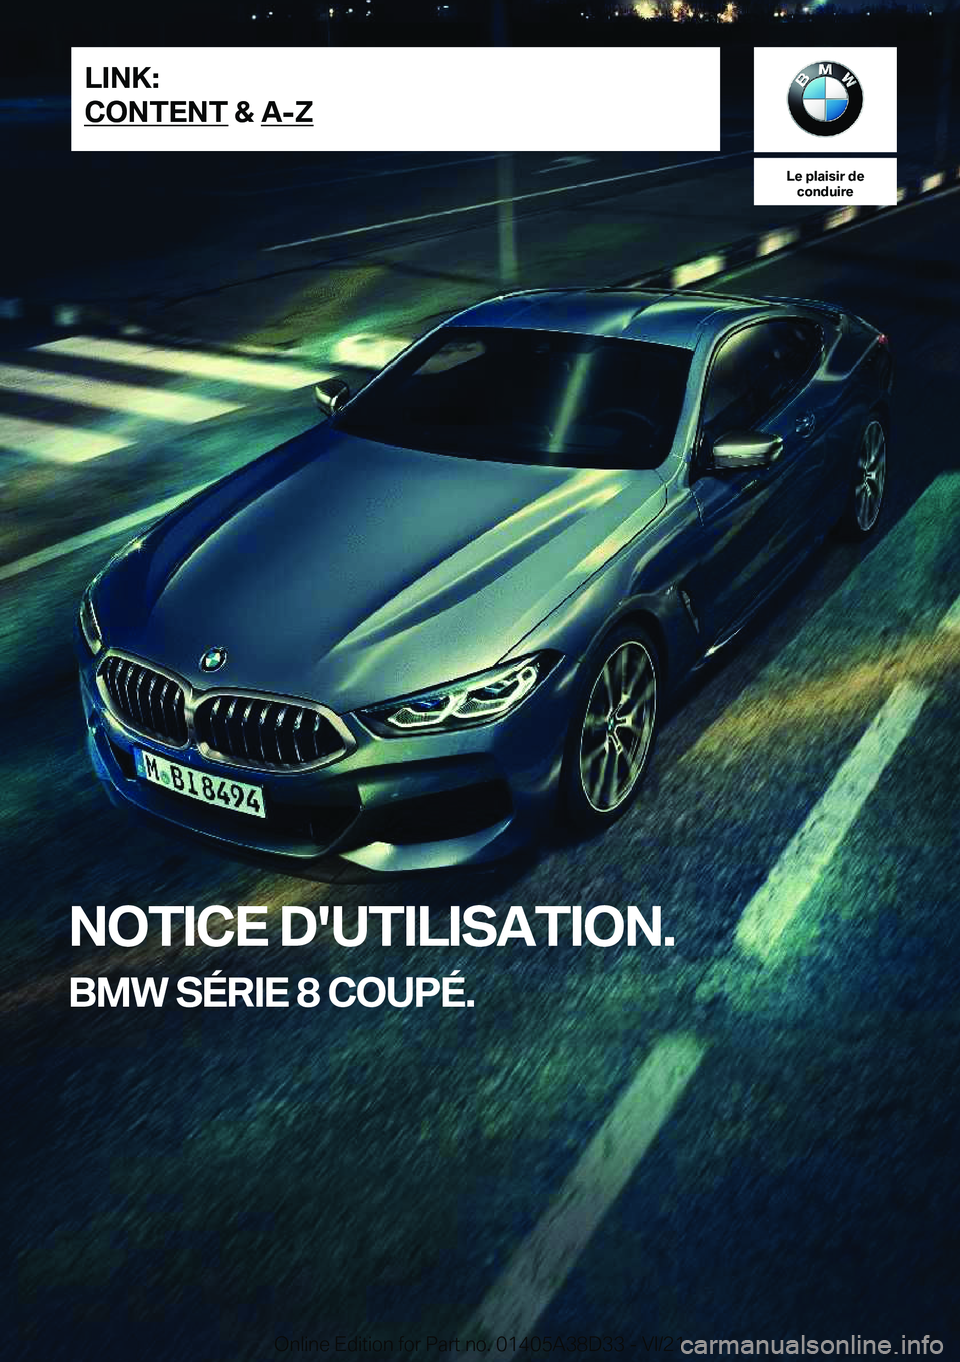 BMW 8 SERIES 2022  Notices Demploi (in French) �L�e��p�l�a�i�s�i�r��d�e�c�o�n�d�u�i�r�e
�N�O�T�I�C�E��D�'�U�T�I�L�I�S�A�T�I�O�N�.
�B�M�W��S�